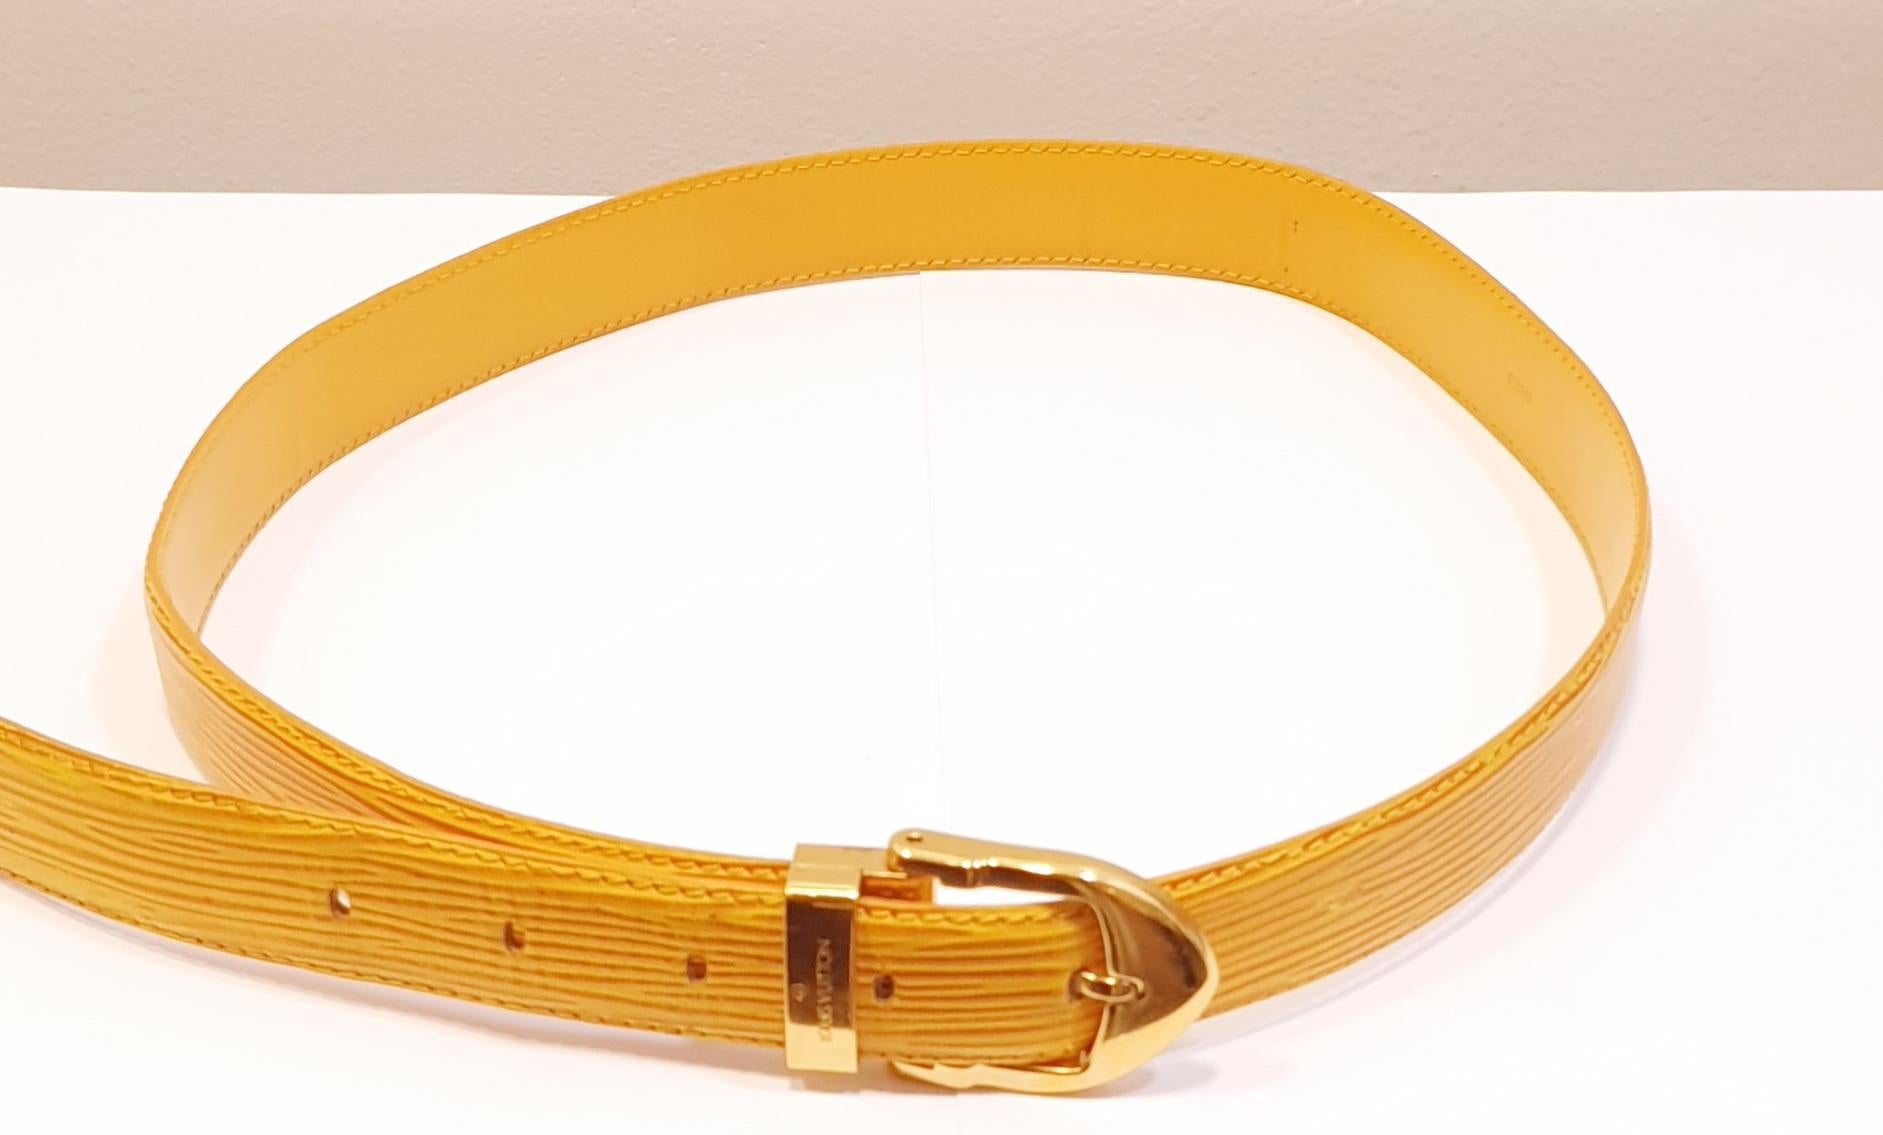 Louis Vuitton
Yellow Epi Leather Ceinture with Gold Buckle Belt
Size 70cm / 27,55 inches 5 blind stamp size settings to 80cm/ 31,56 inches - the largest fitting 32,67